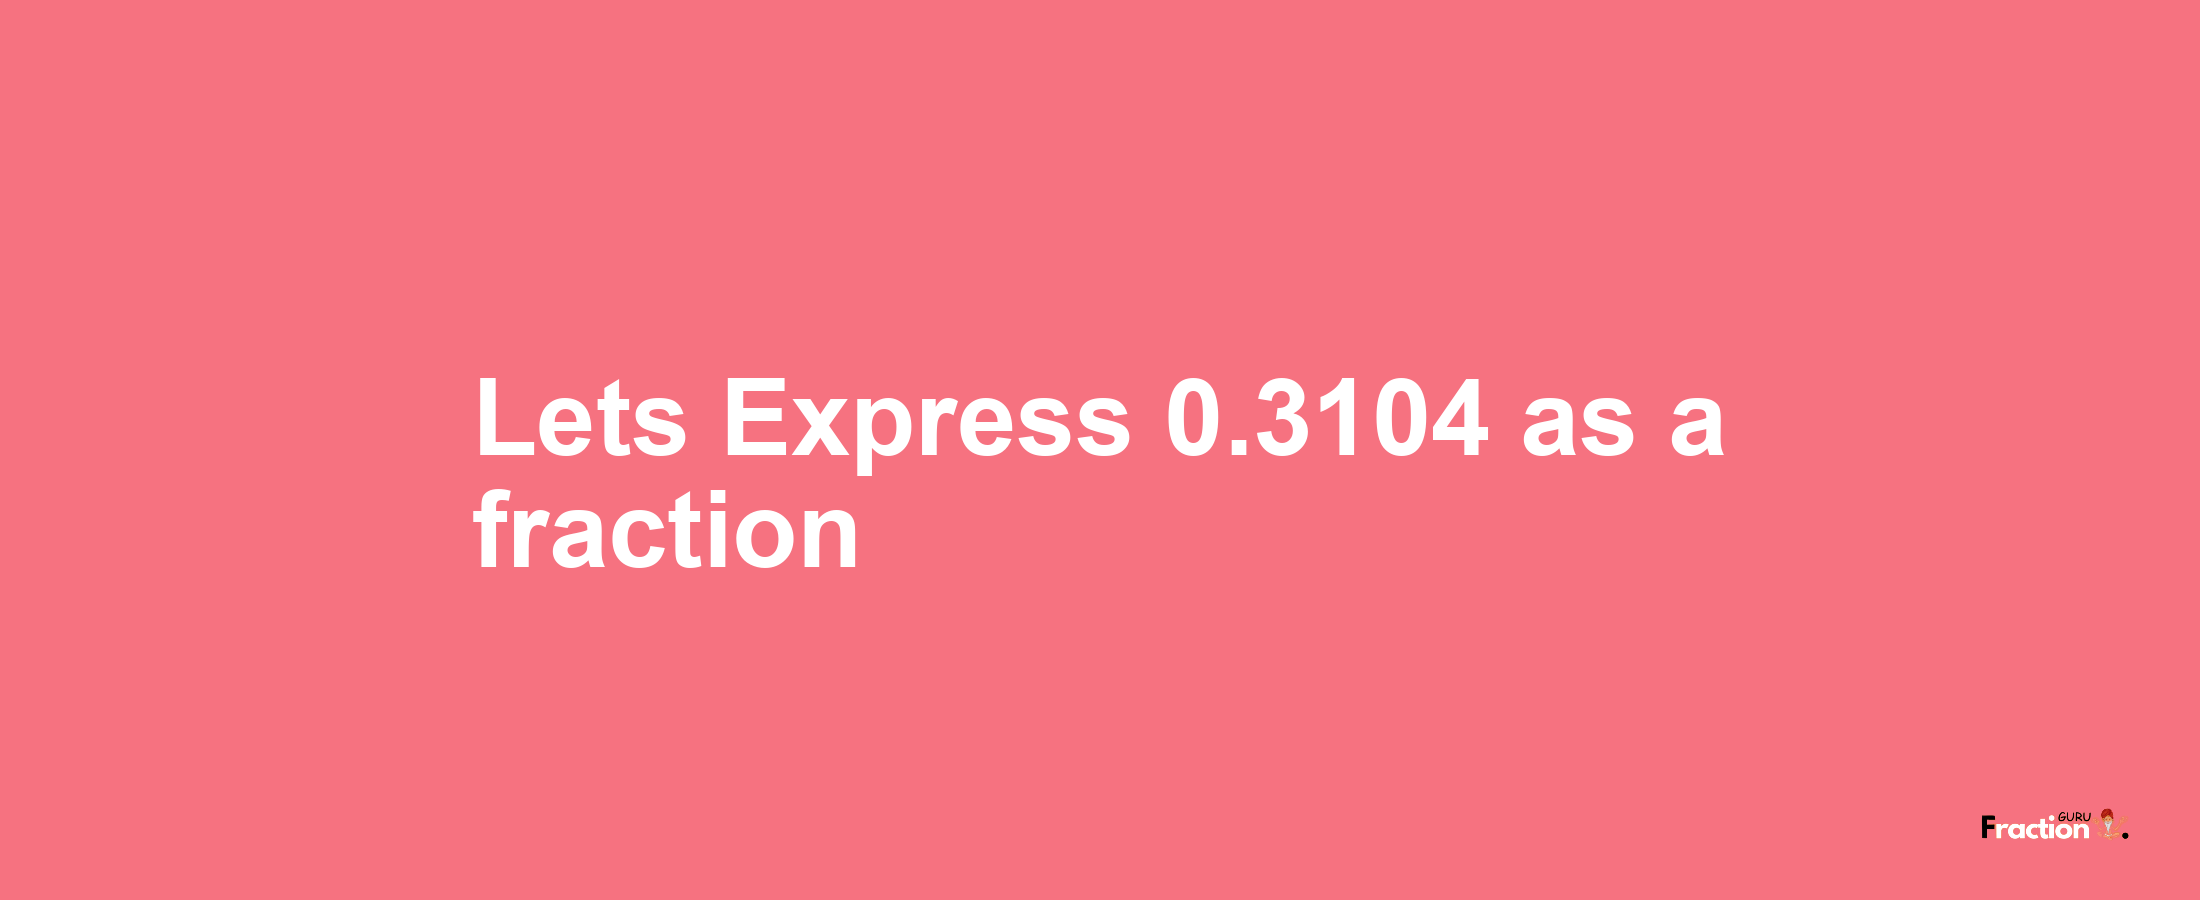 Lets Express 0.3104 as afraction